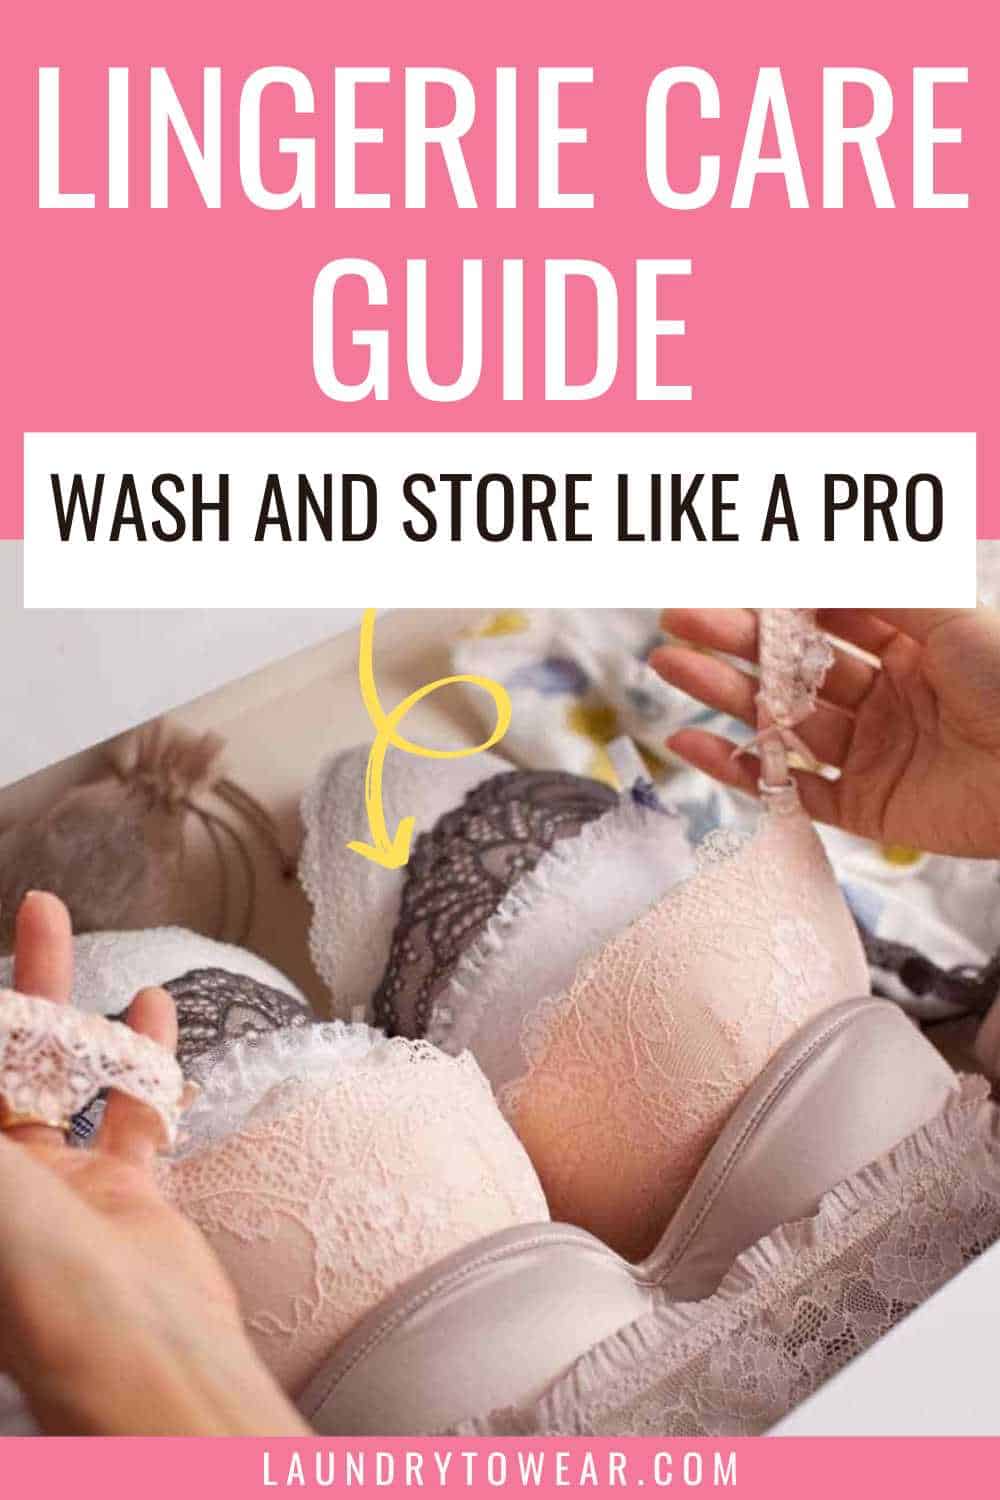 How To Wash and Store Lingerie